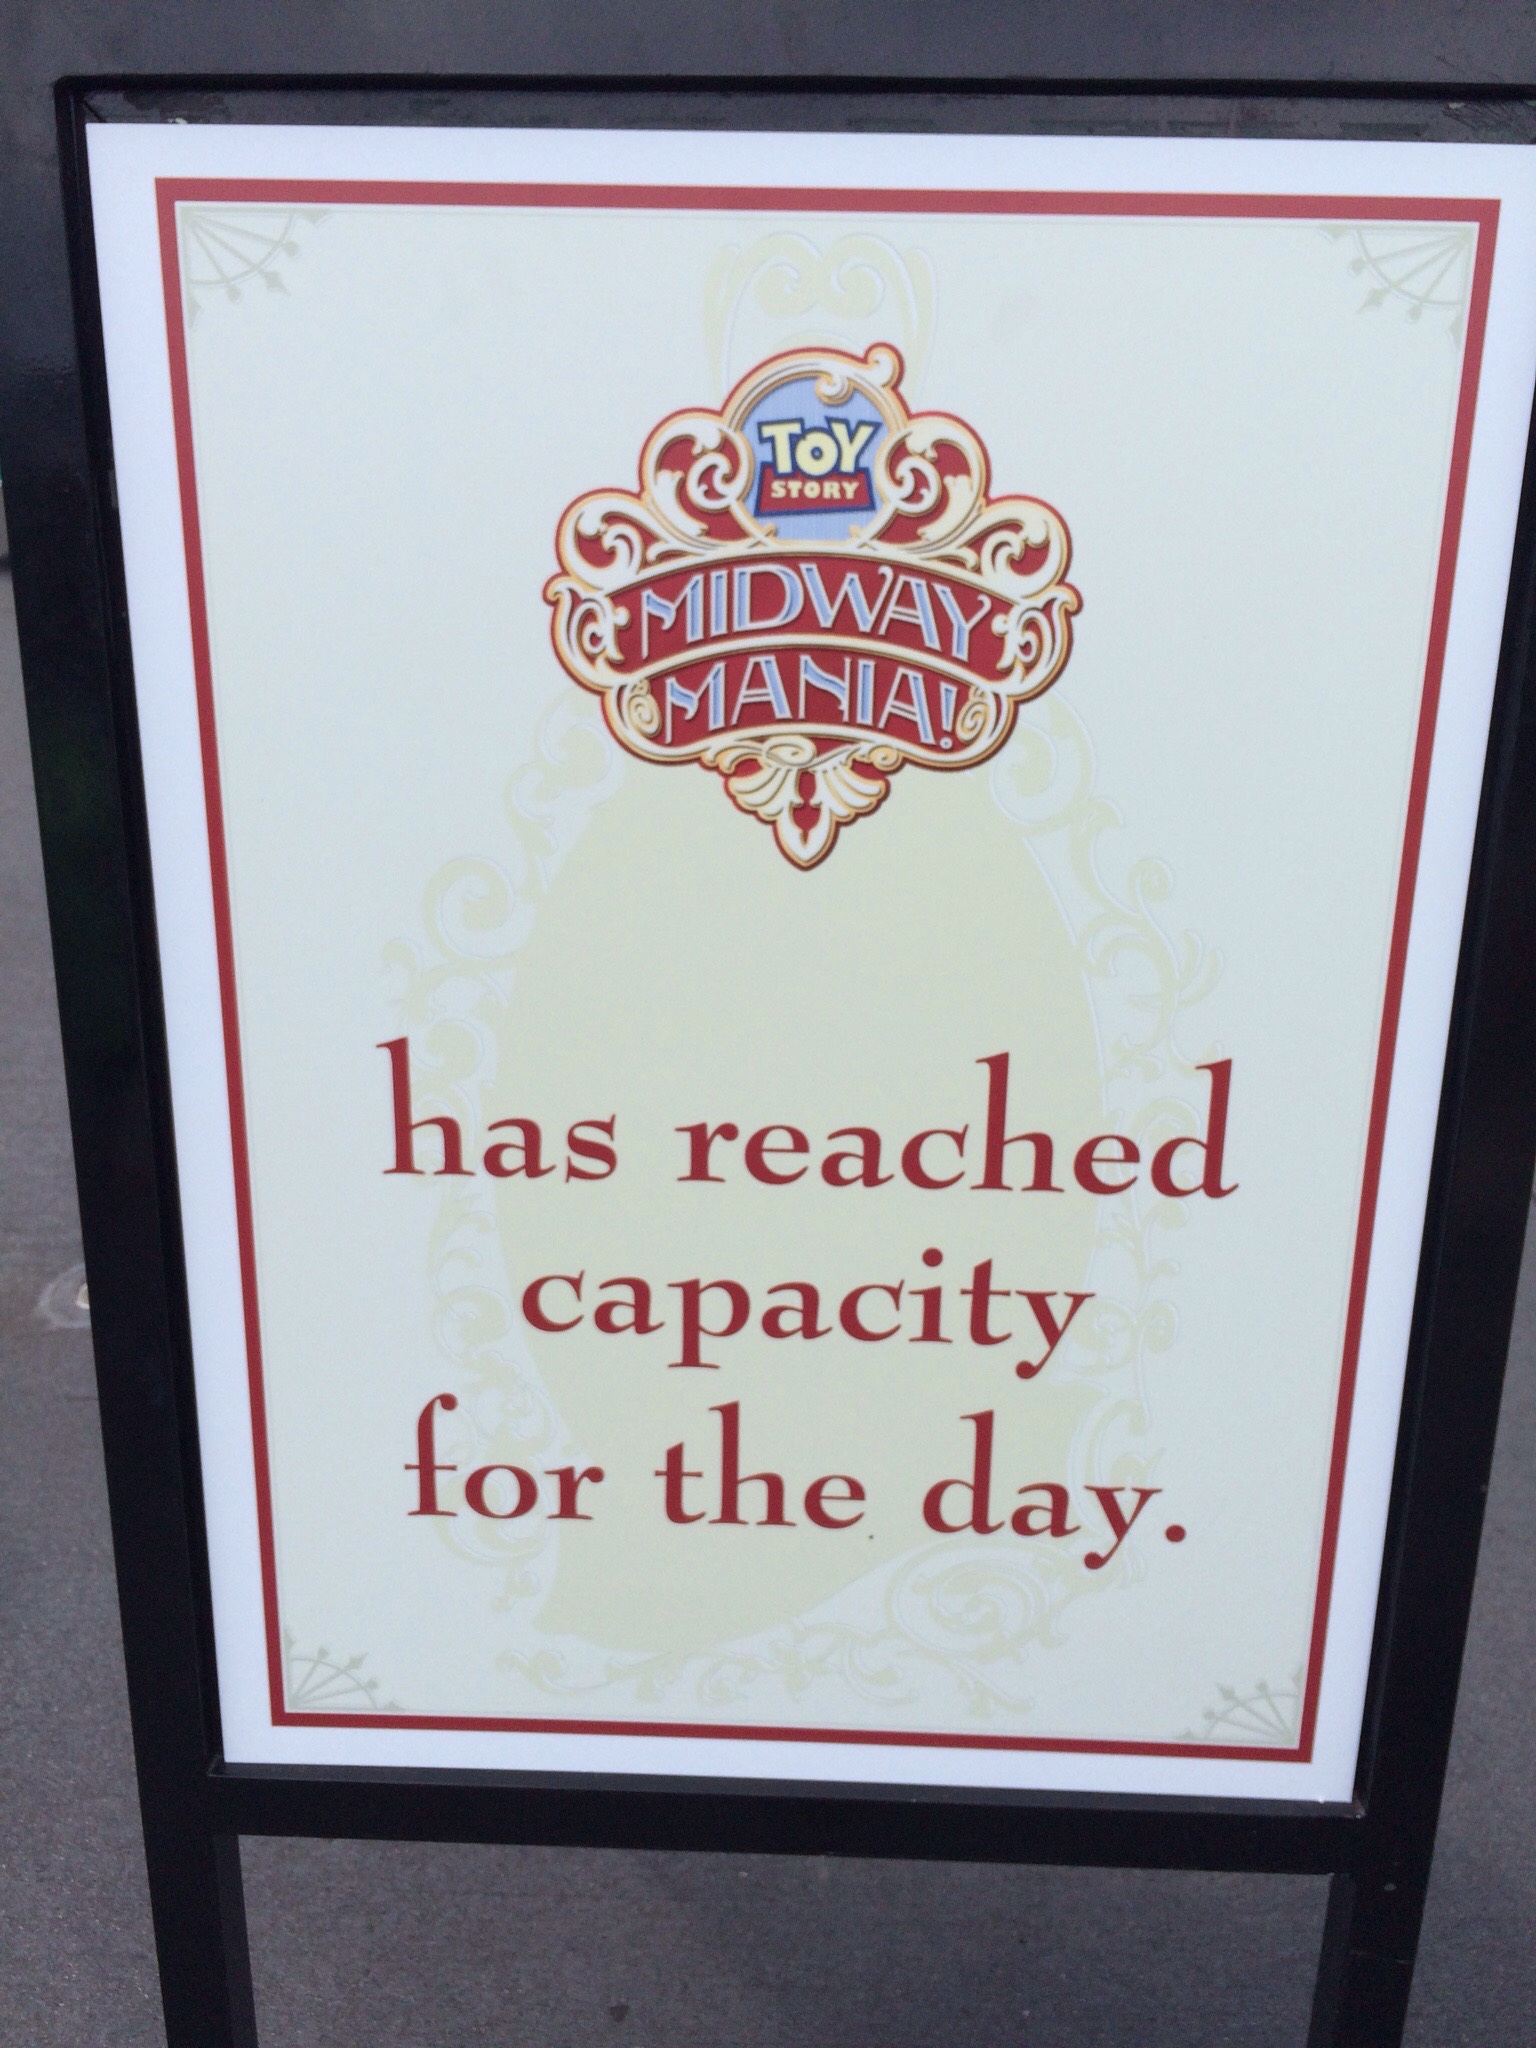 Toy Story Mania FastPass+ only test